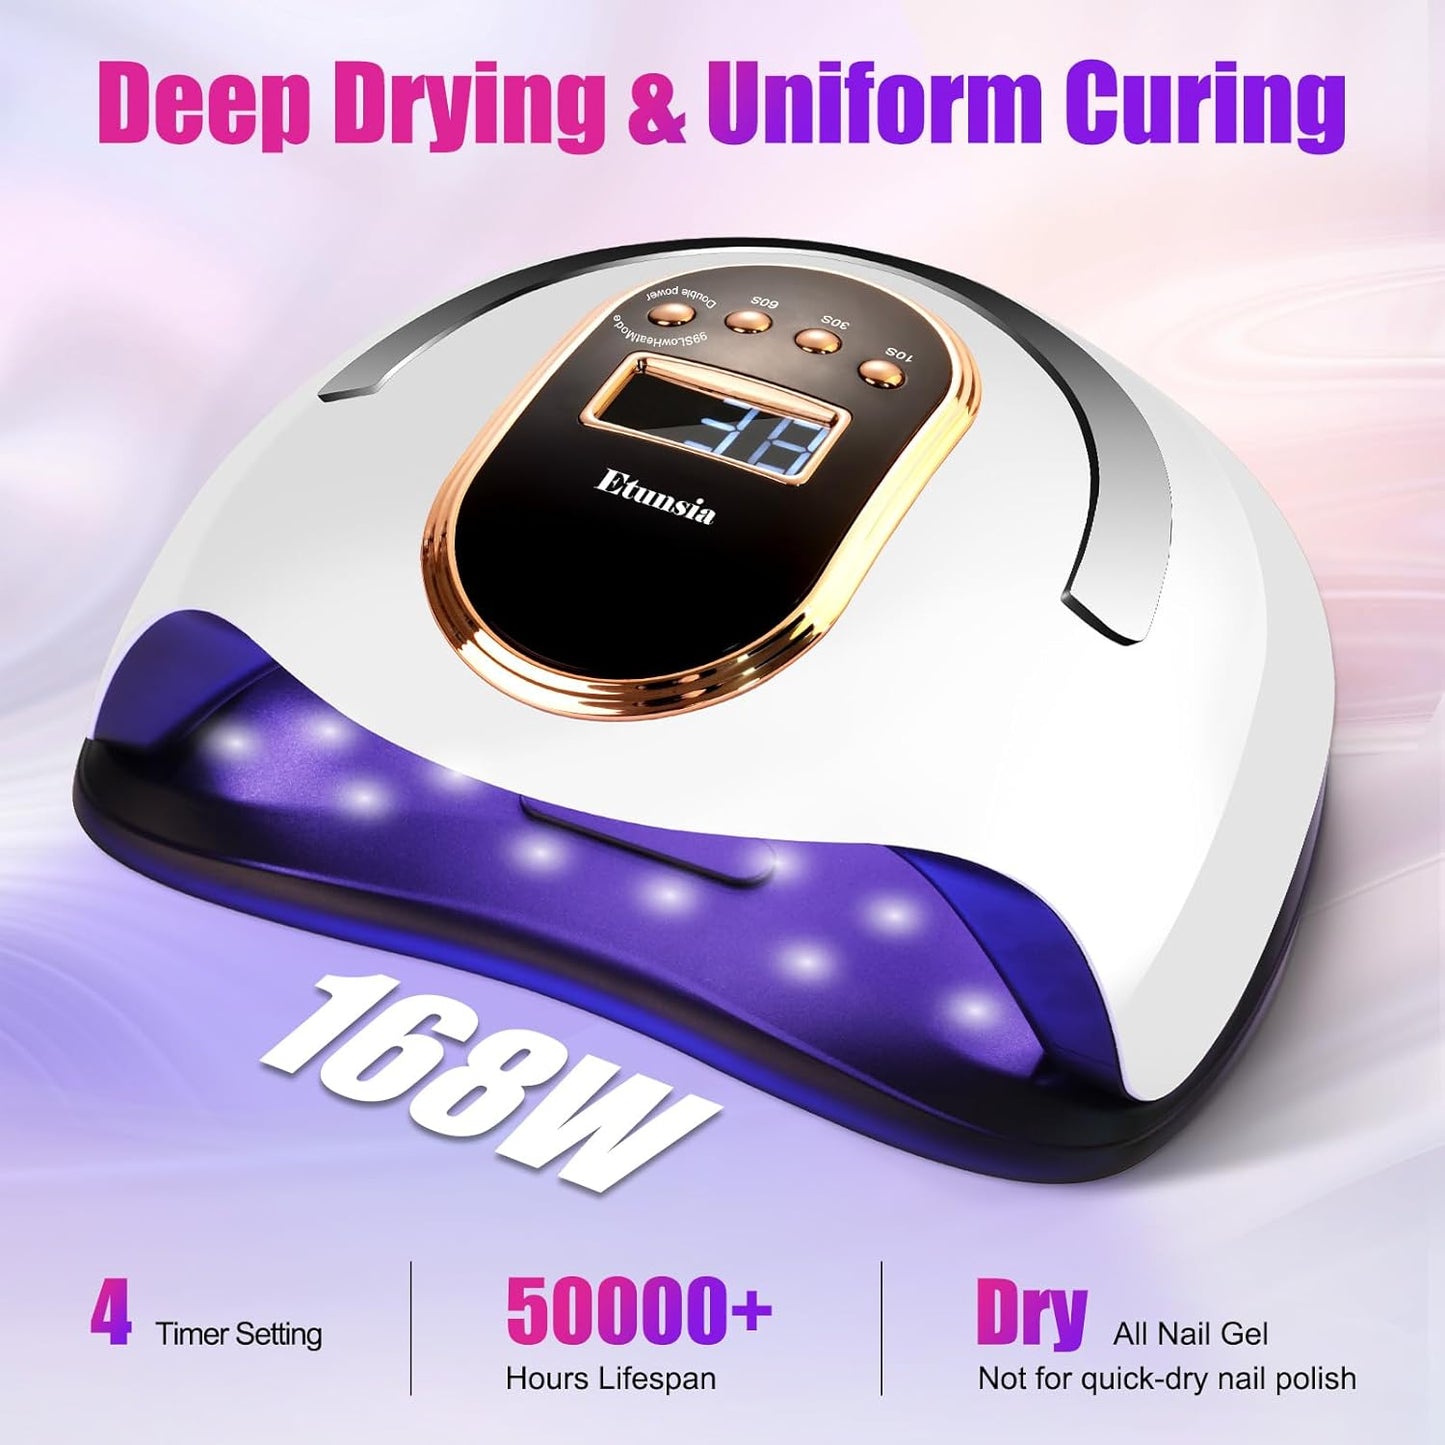 UV Light for Nails, 168W UV Light for Gel Nails/Acrylic, UV LED Nail Lamp with 4 Timer Modes - Automatic Sensor -LCD Screen - 2 UV Gloves UPF50+, Gel Nail Light for Salon Quality at Home